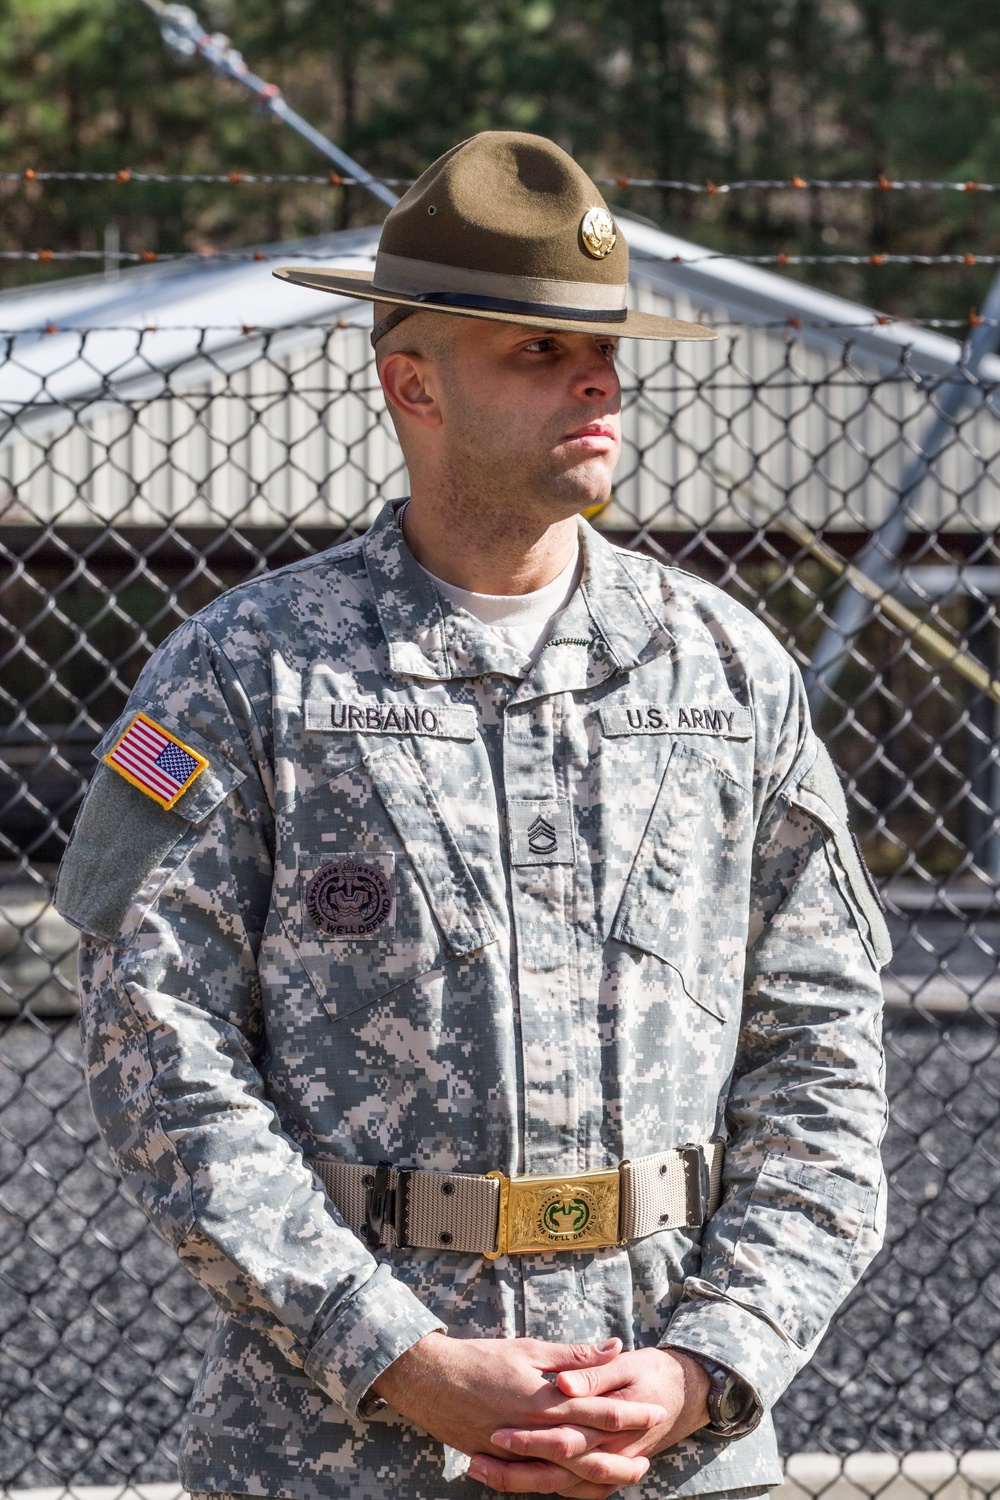 Cadre in focus: Sgt. 1st Class Jordany Urbano